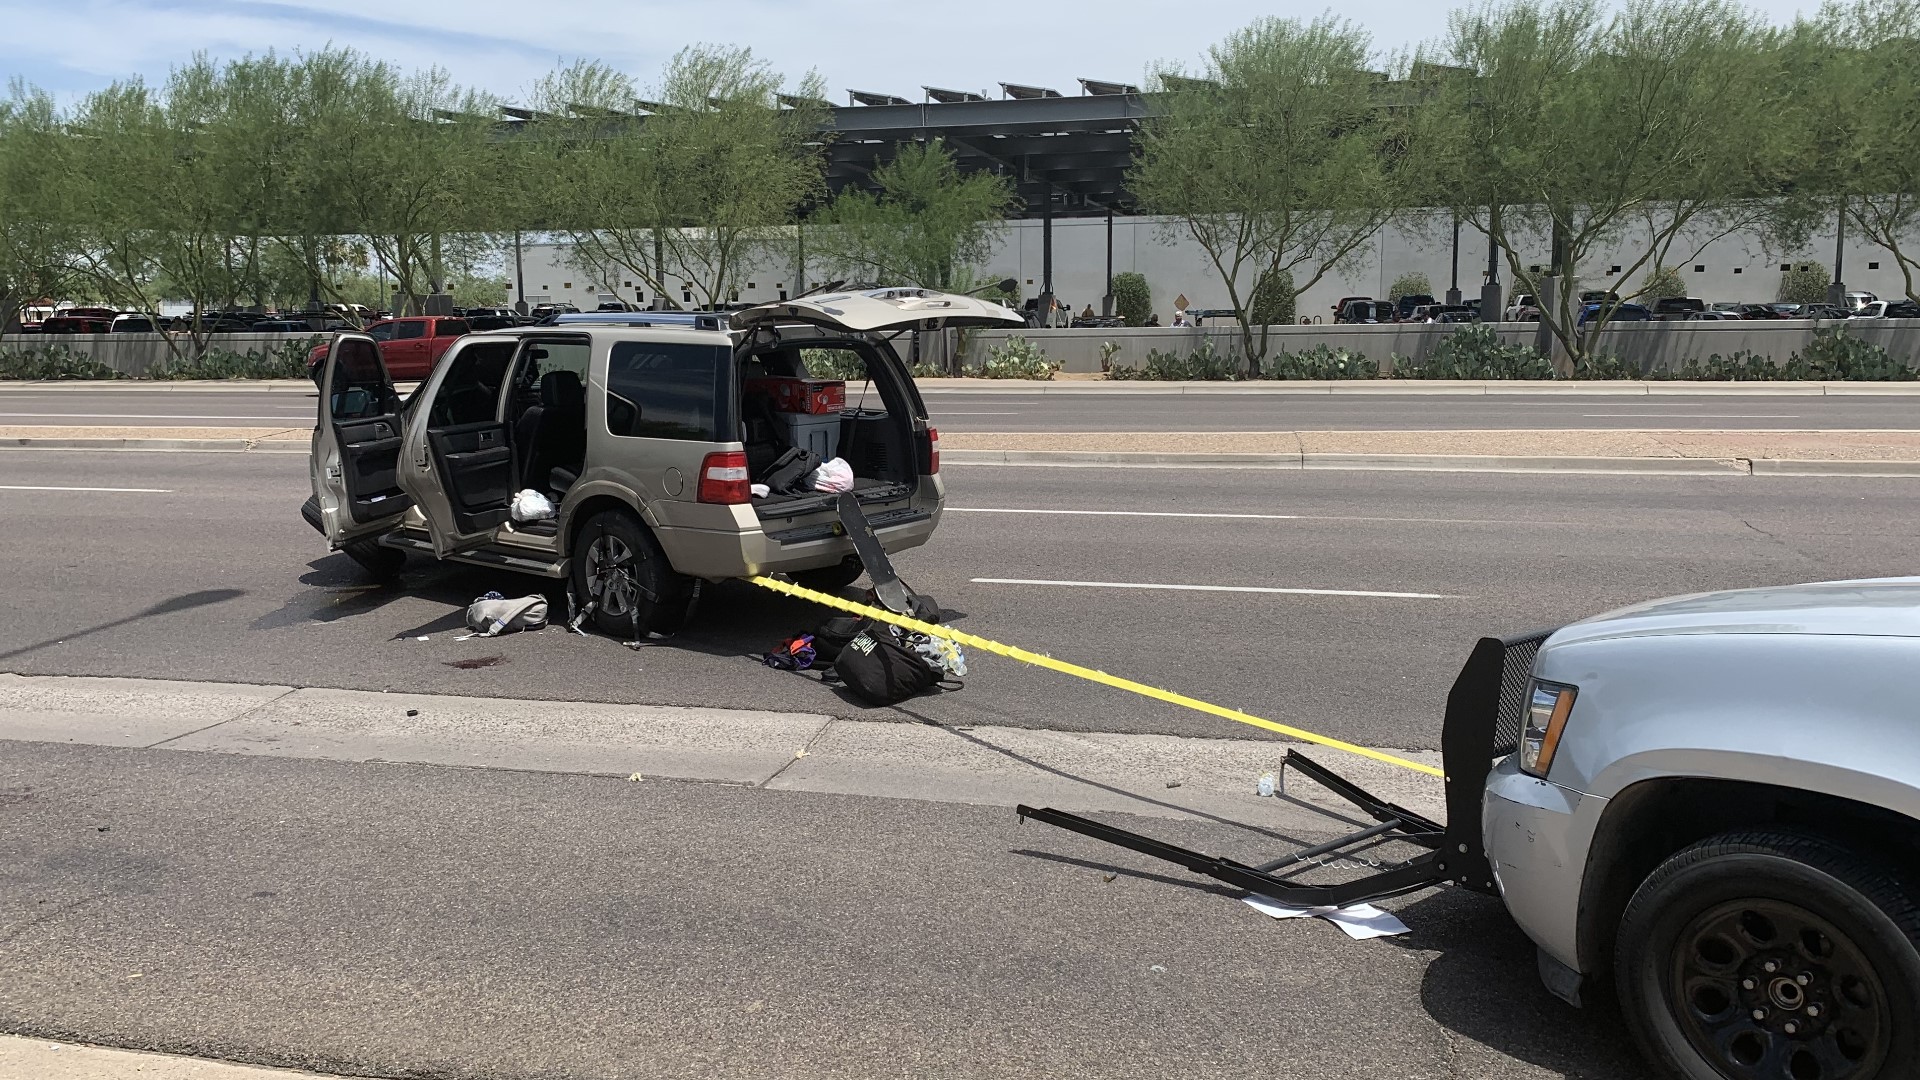 Mesa police were alerted to the stolen vehicle after it was detected by a license plate reader near Country Club Drive and Hampton Avenue.